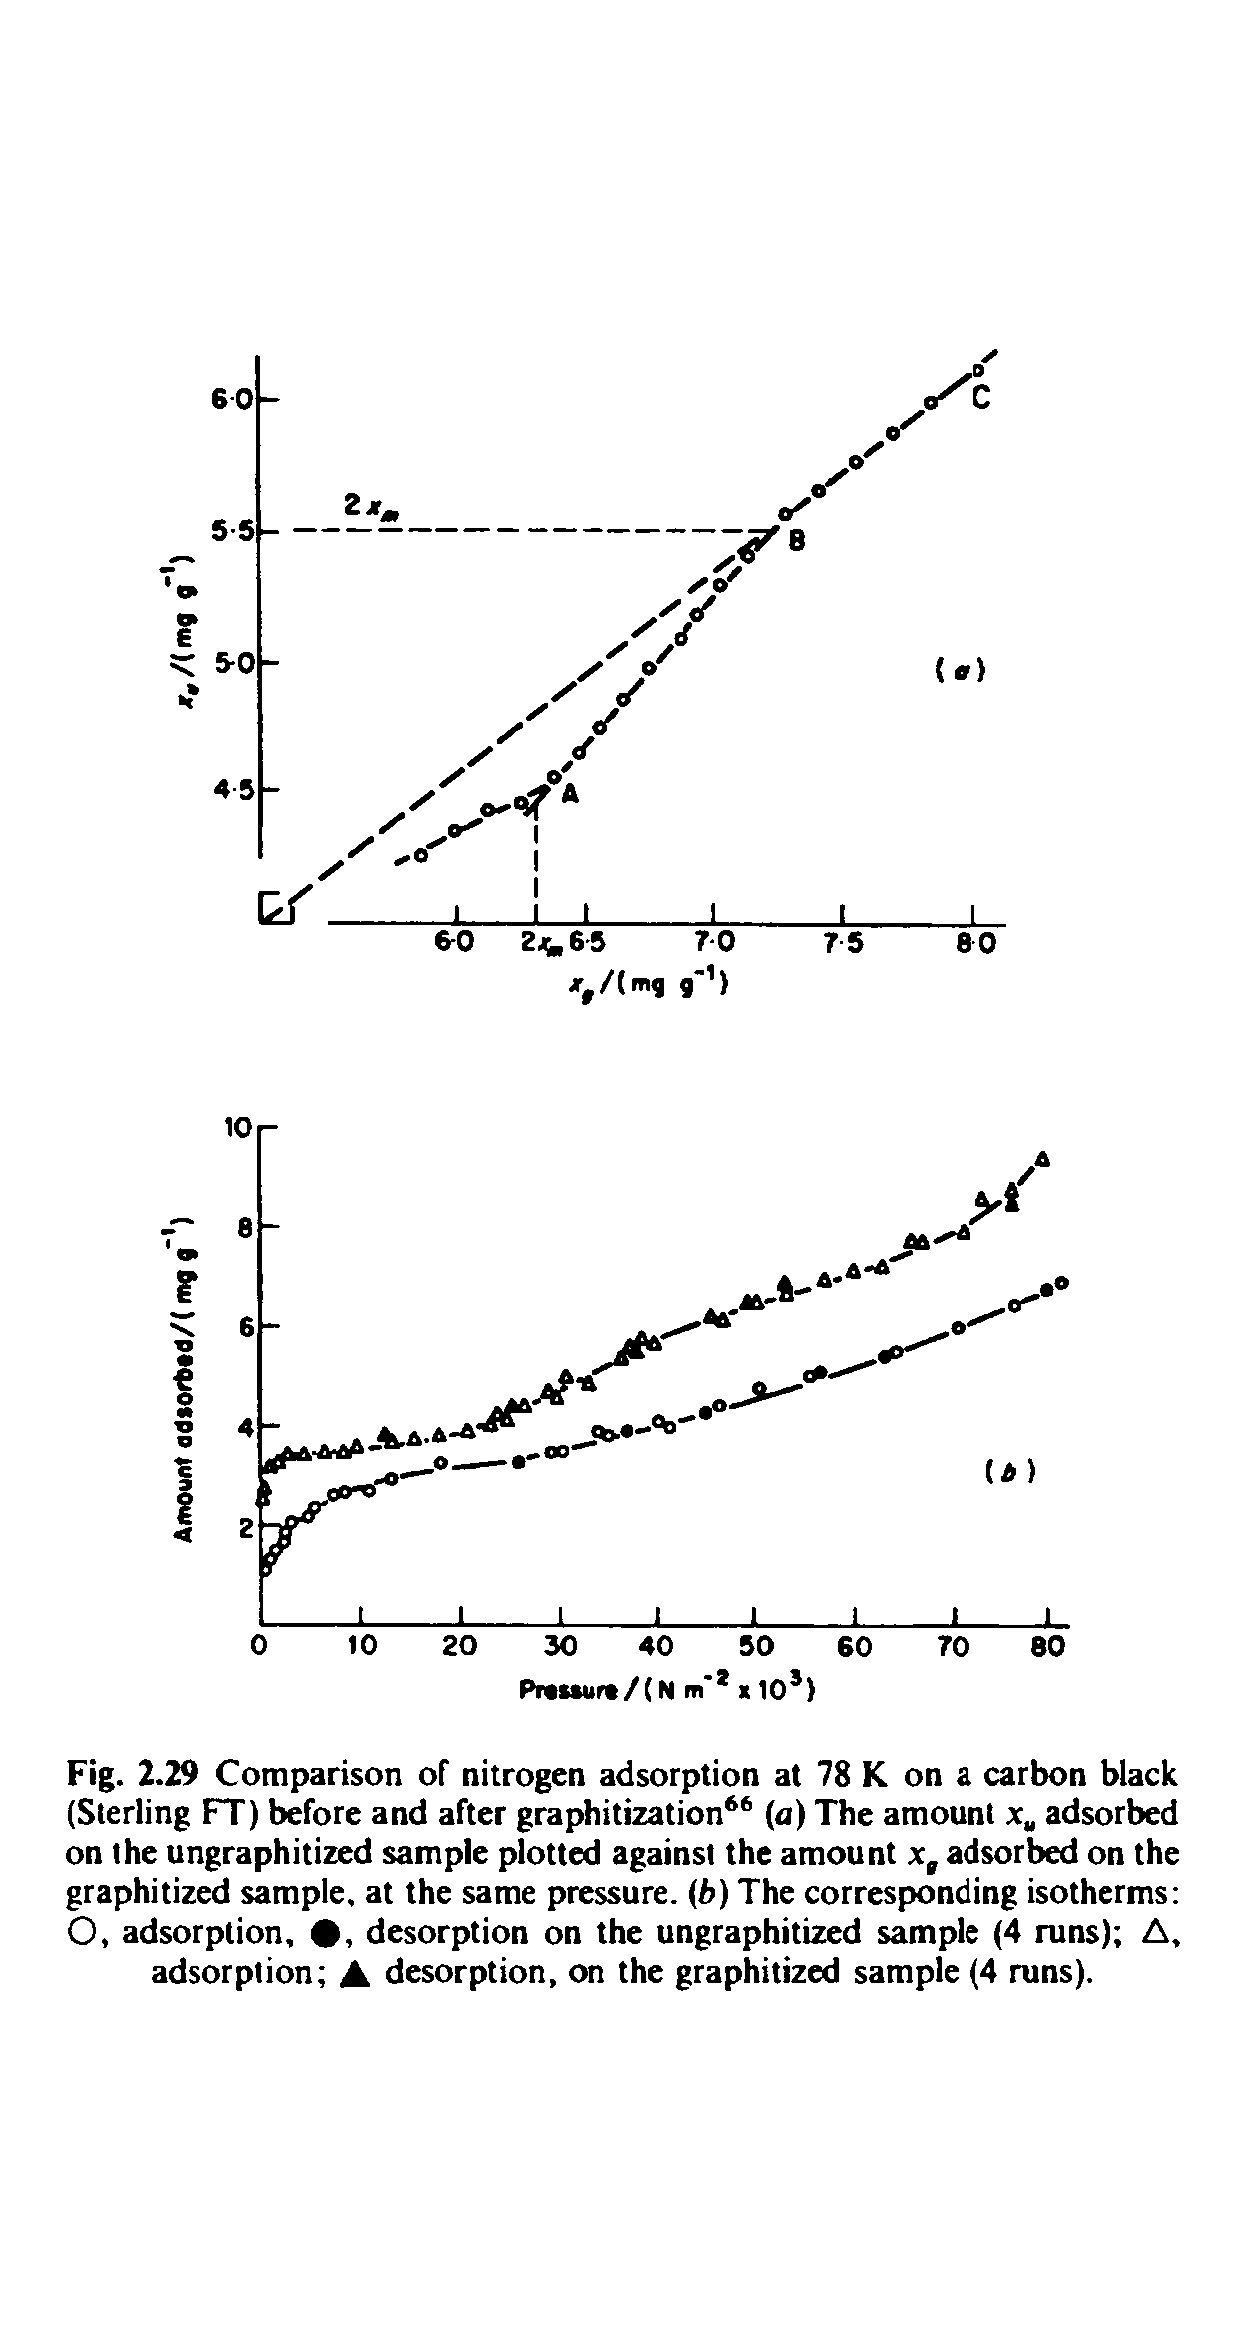 Fig. 2.29 Comparison of nitrogen adsorption at 78 K on a carbon black (Sterling FT) before and after graphitization (a) The amount adsorbed on the ungraphitized sample plotted against the amount x, adsorbed on the graphitized sample, at the same pressure, b) The corresponding isotherms O, adsorption, , desorption on the ungraphitized sample (4 runs) A. adsorption A desorption, on the graphitized sample (4 runs).